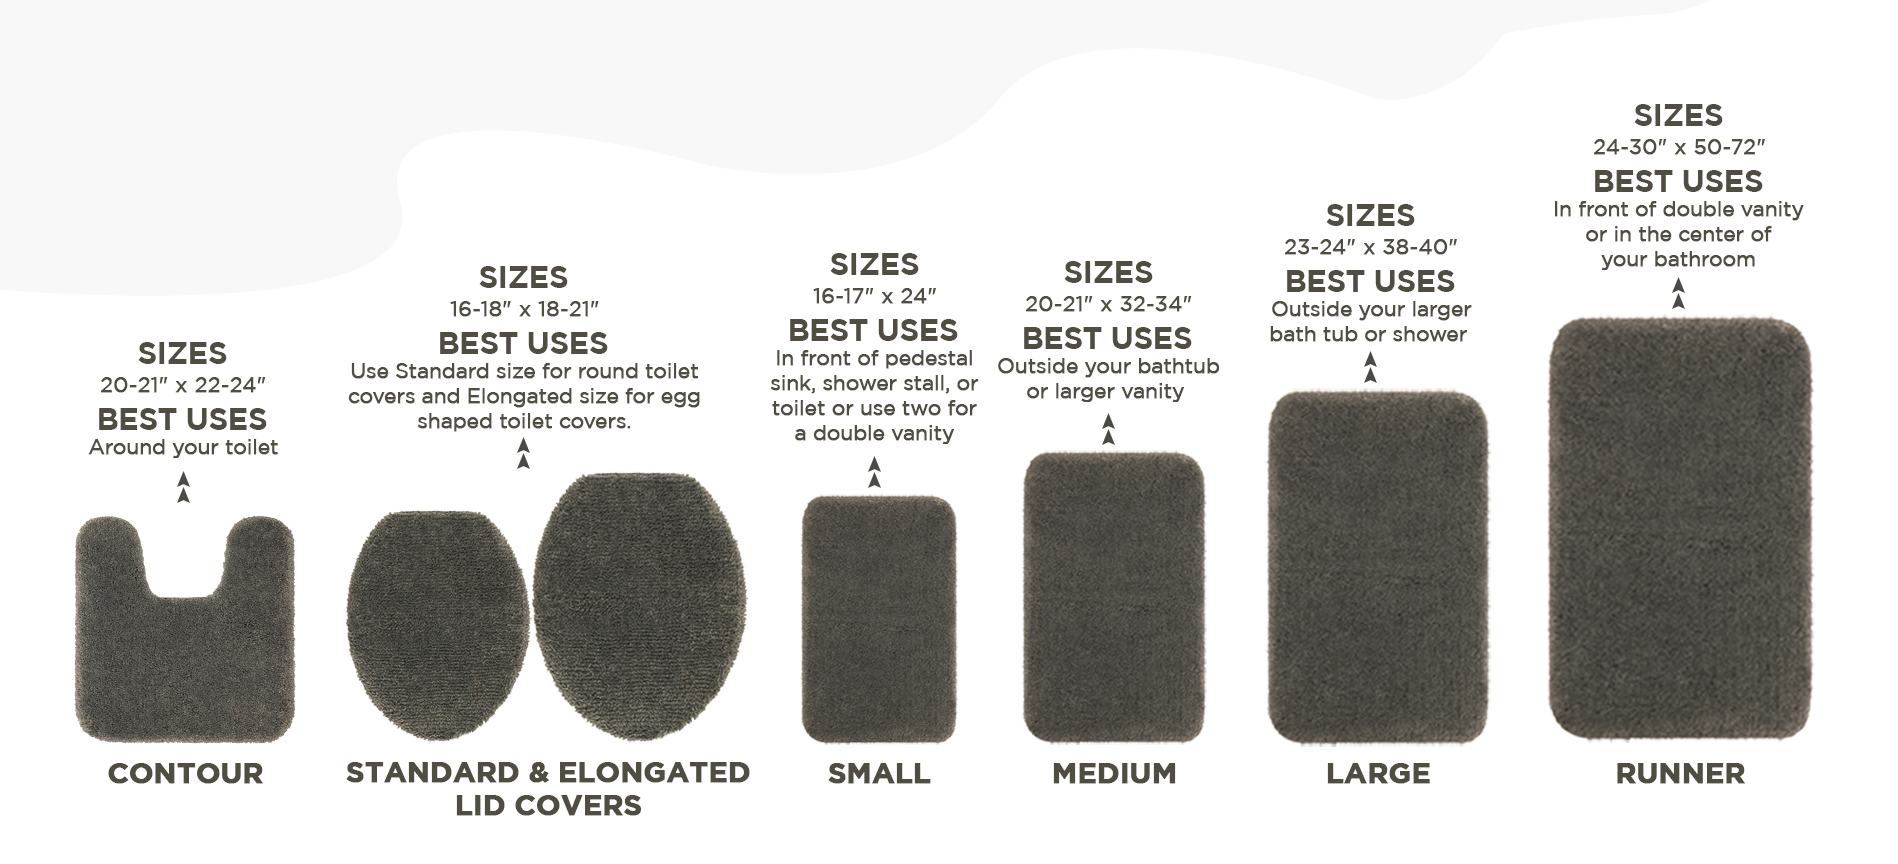 How Should You Size Your Bathroom Rug?